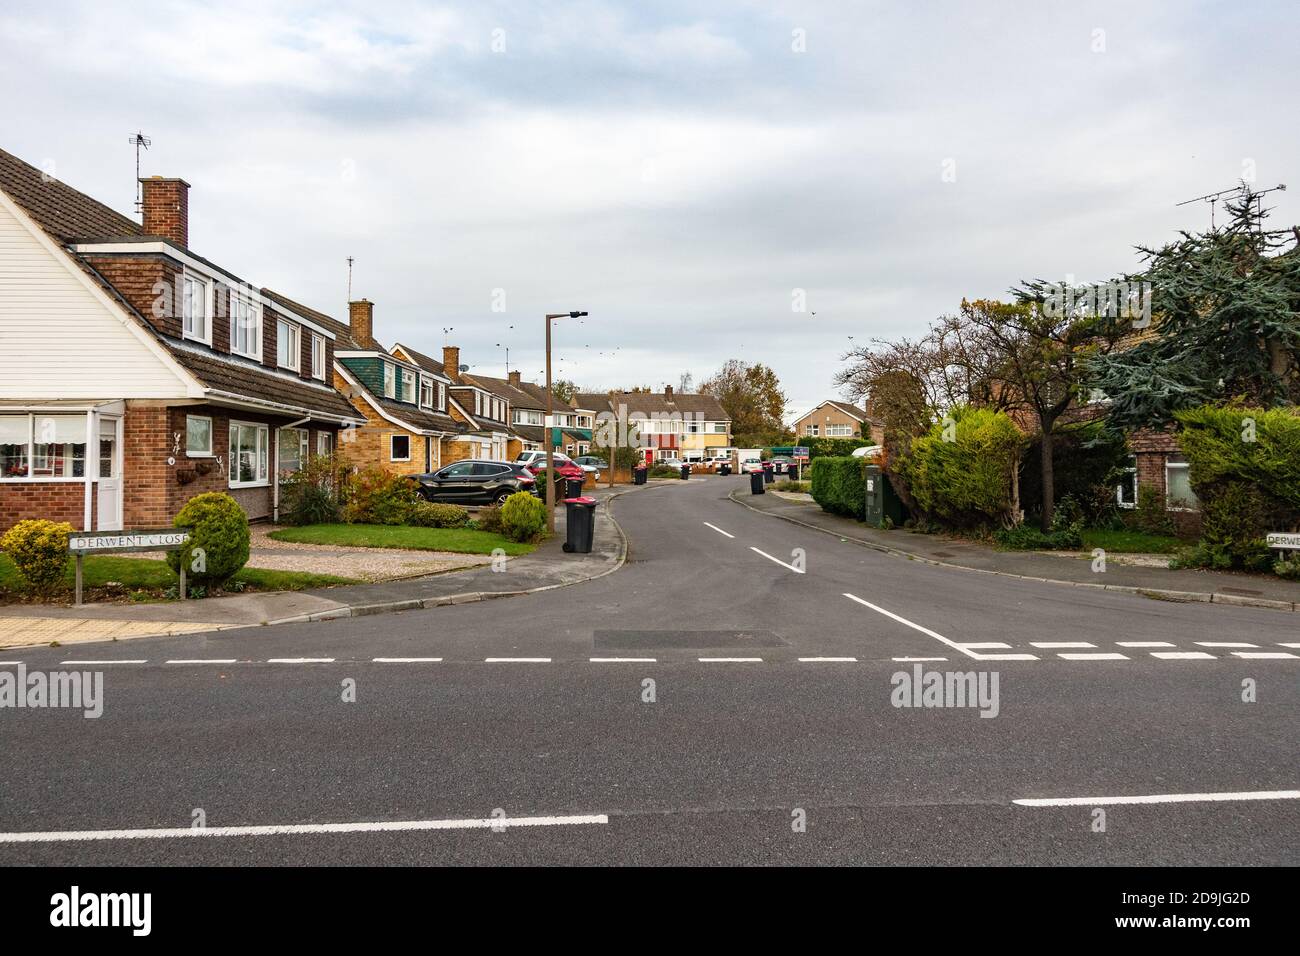 Typical housing estate in Yorkshire, England Stock Photo